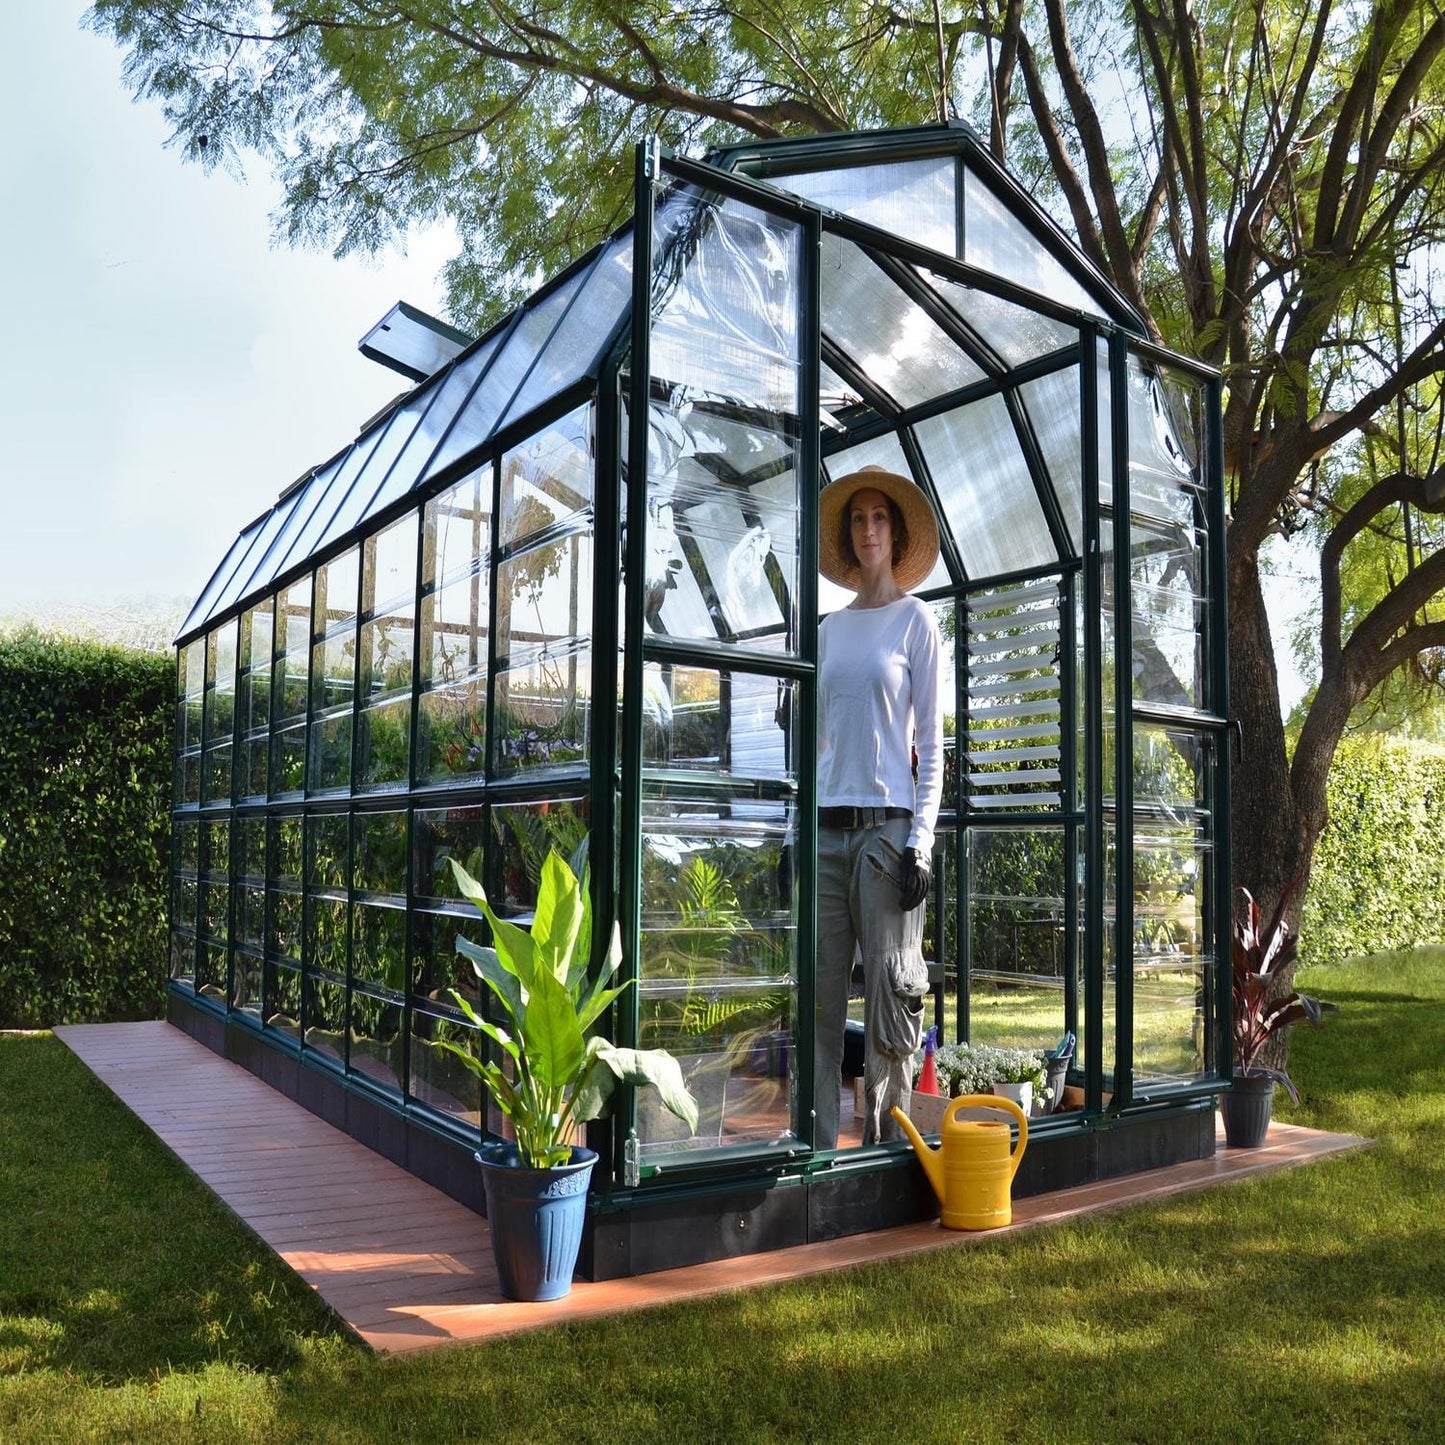 Palram - Canopia Greenhouses Palram - Canopia | Prestige 8x16 ft Clear Greenhouse Package HG7316C